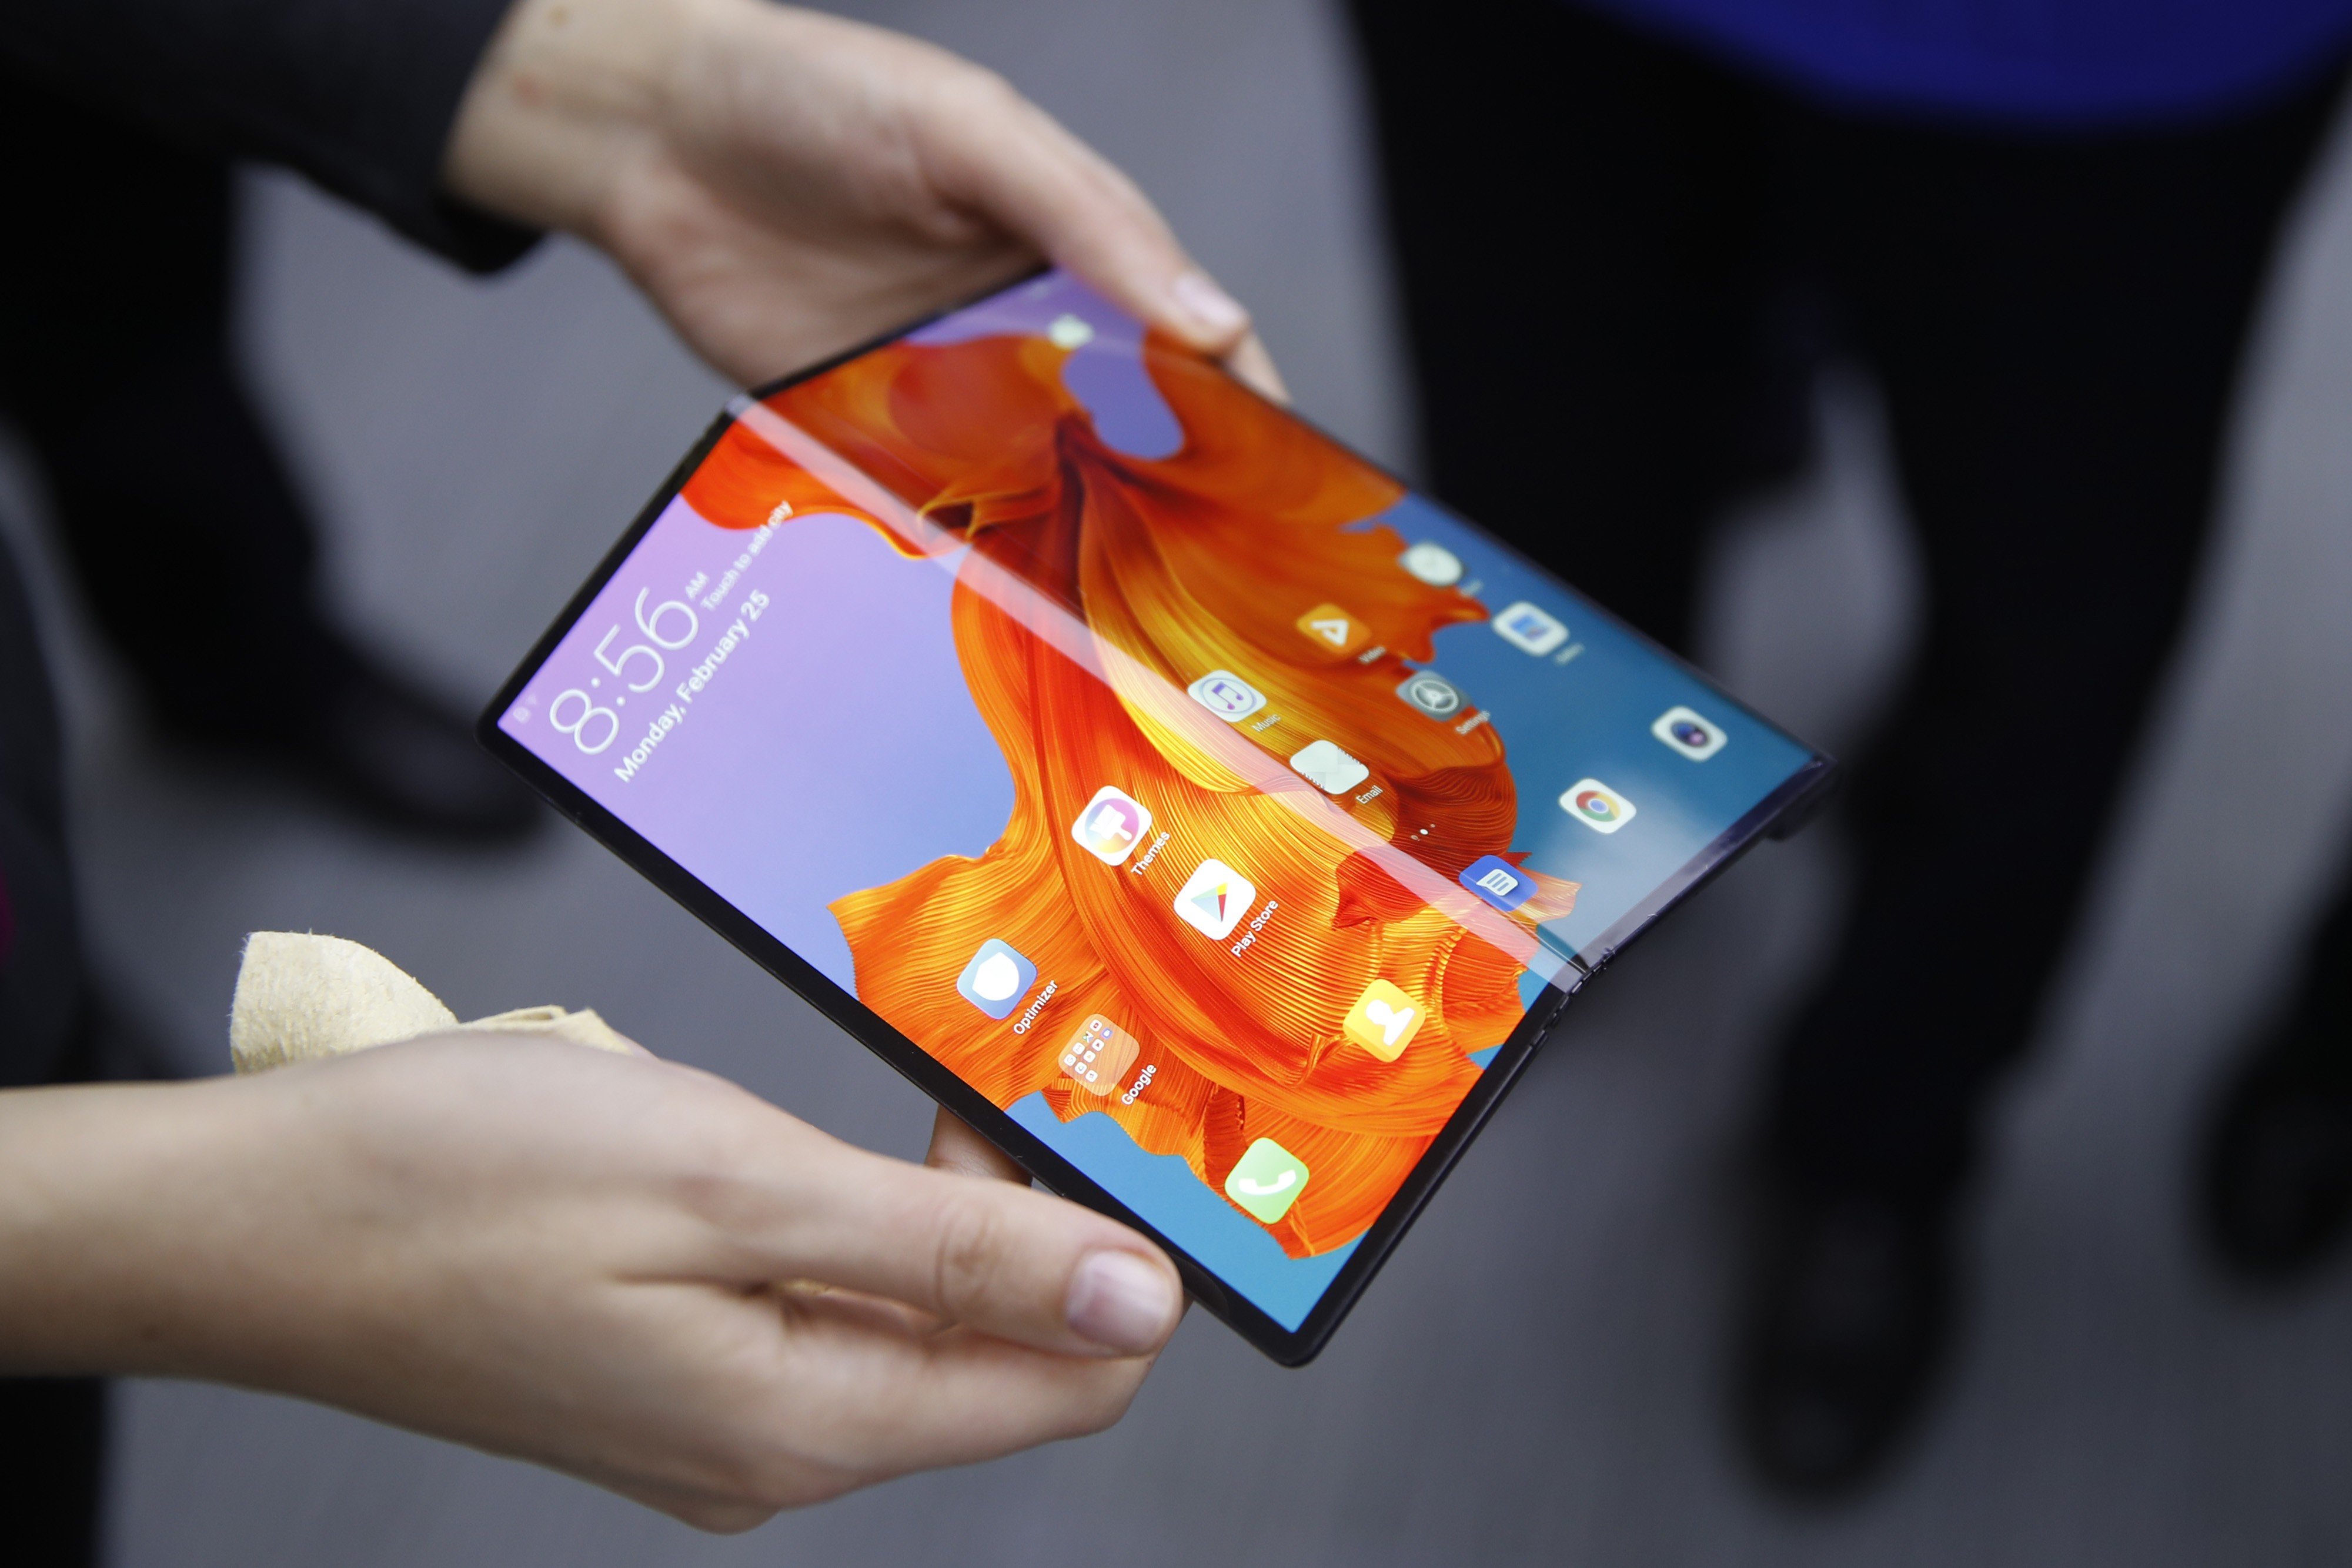 Huawei’s Mate X foldable 5G mobile device was easily the star of this year’s Mobile World Congress. Photo: Bloomberg